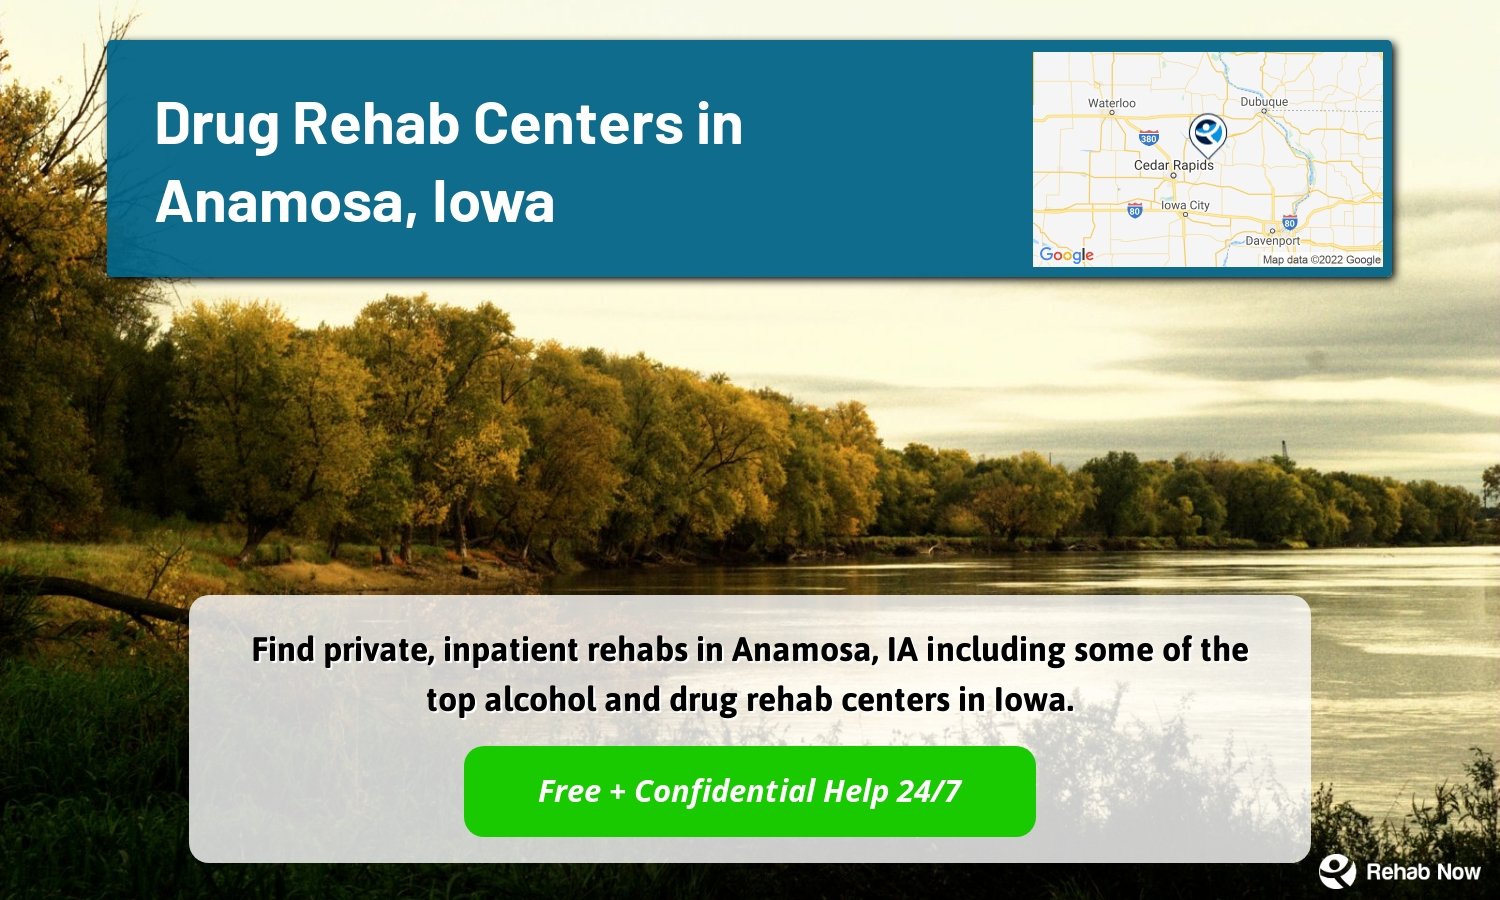 Find private, inpatient rehabs in Anamosa, IA including some of the top alcohol and drug rehab centers in Iowa.